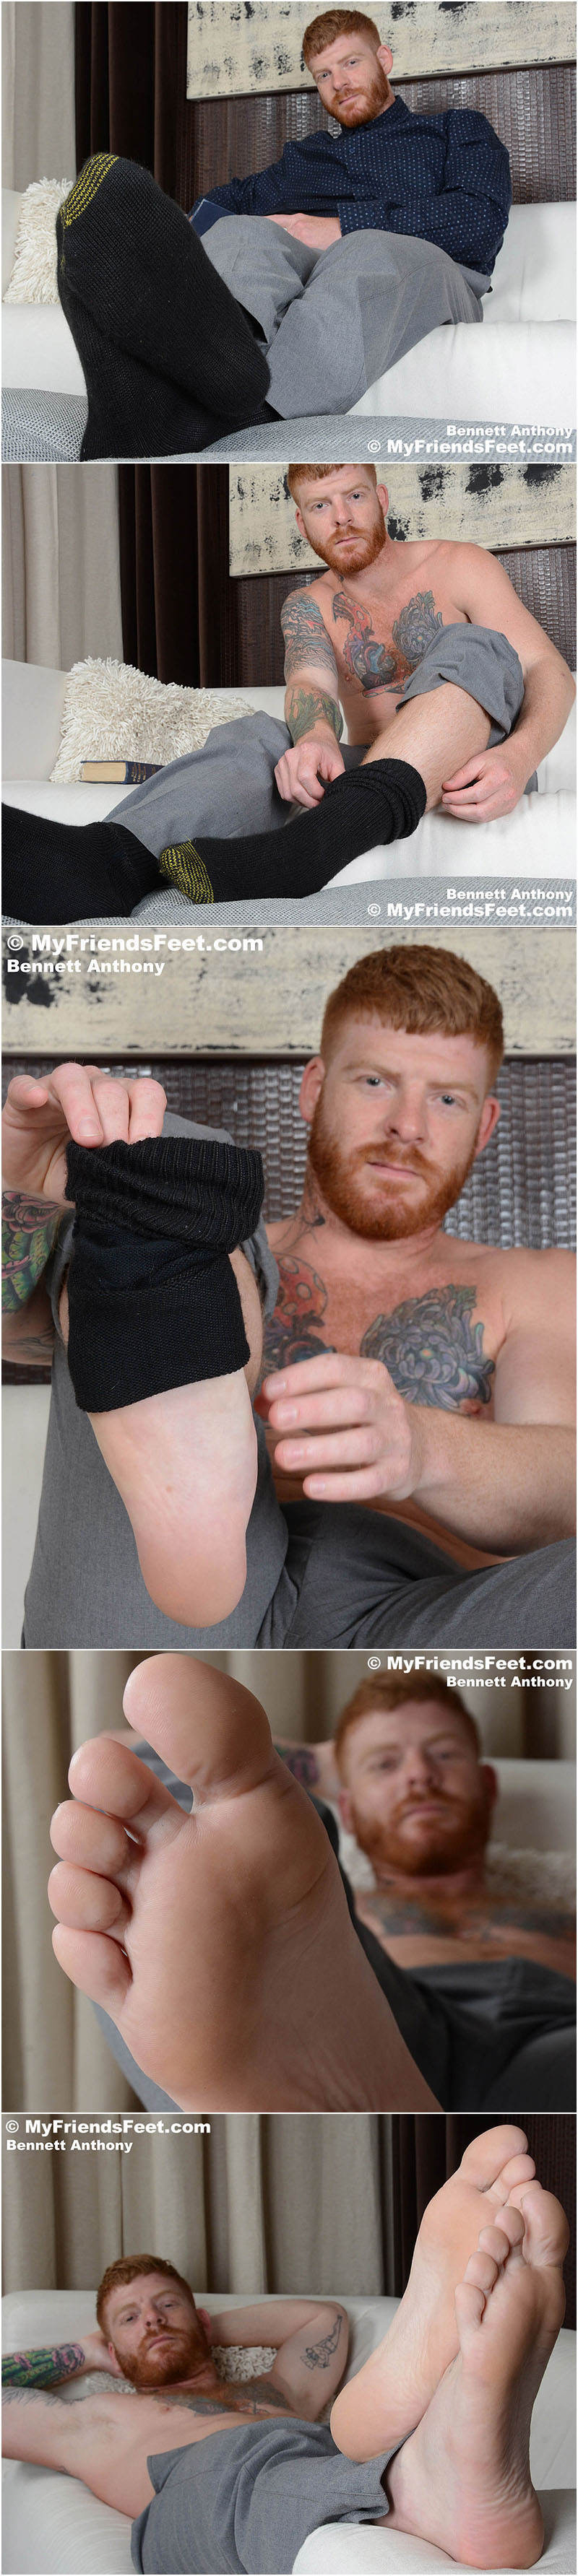 redheaded gay porn star Bennett Anthony shows off his feet in gold toe socks and barefoot